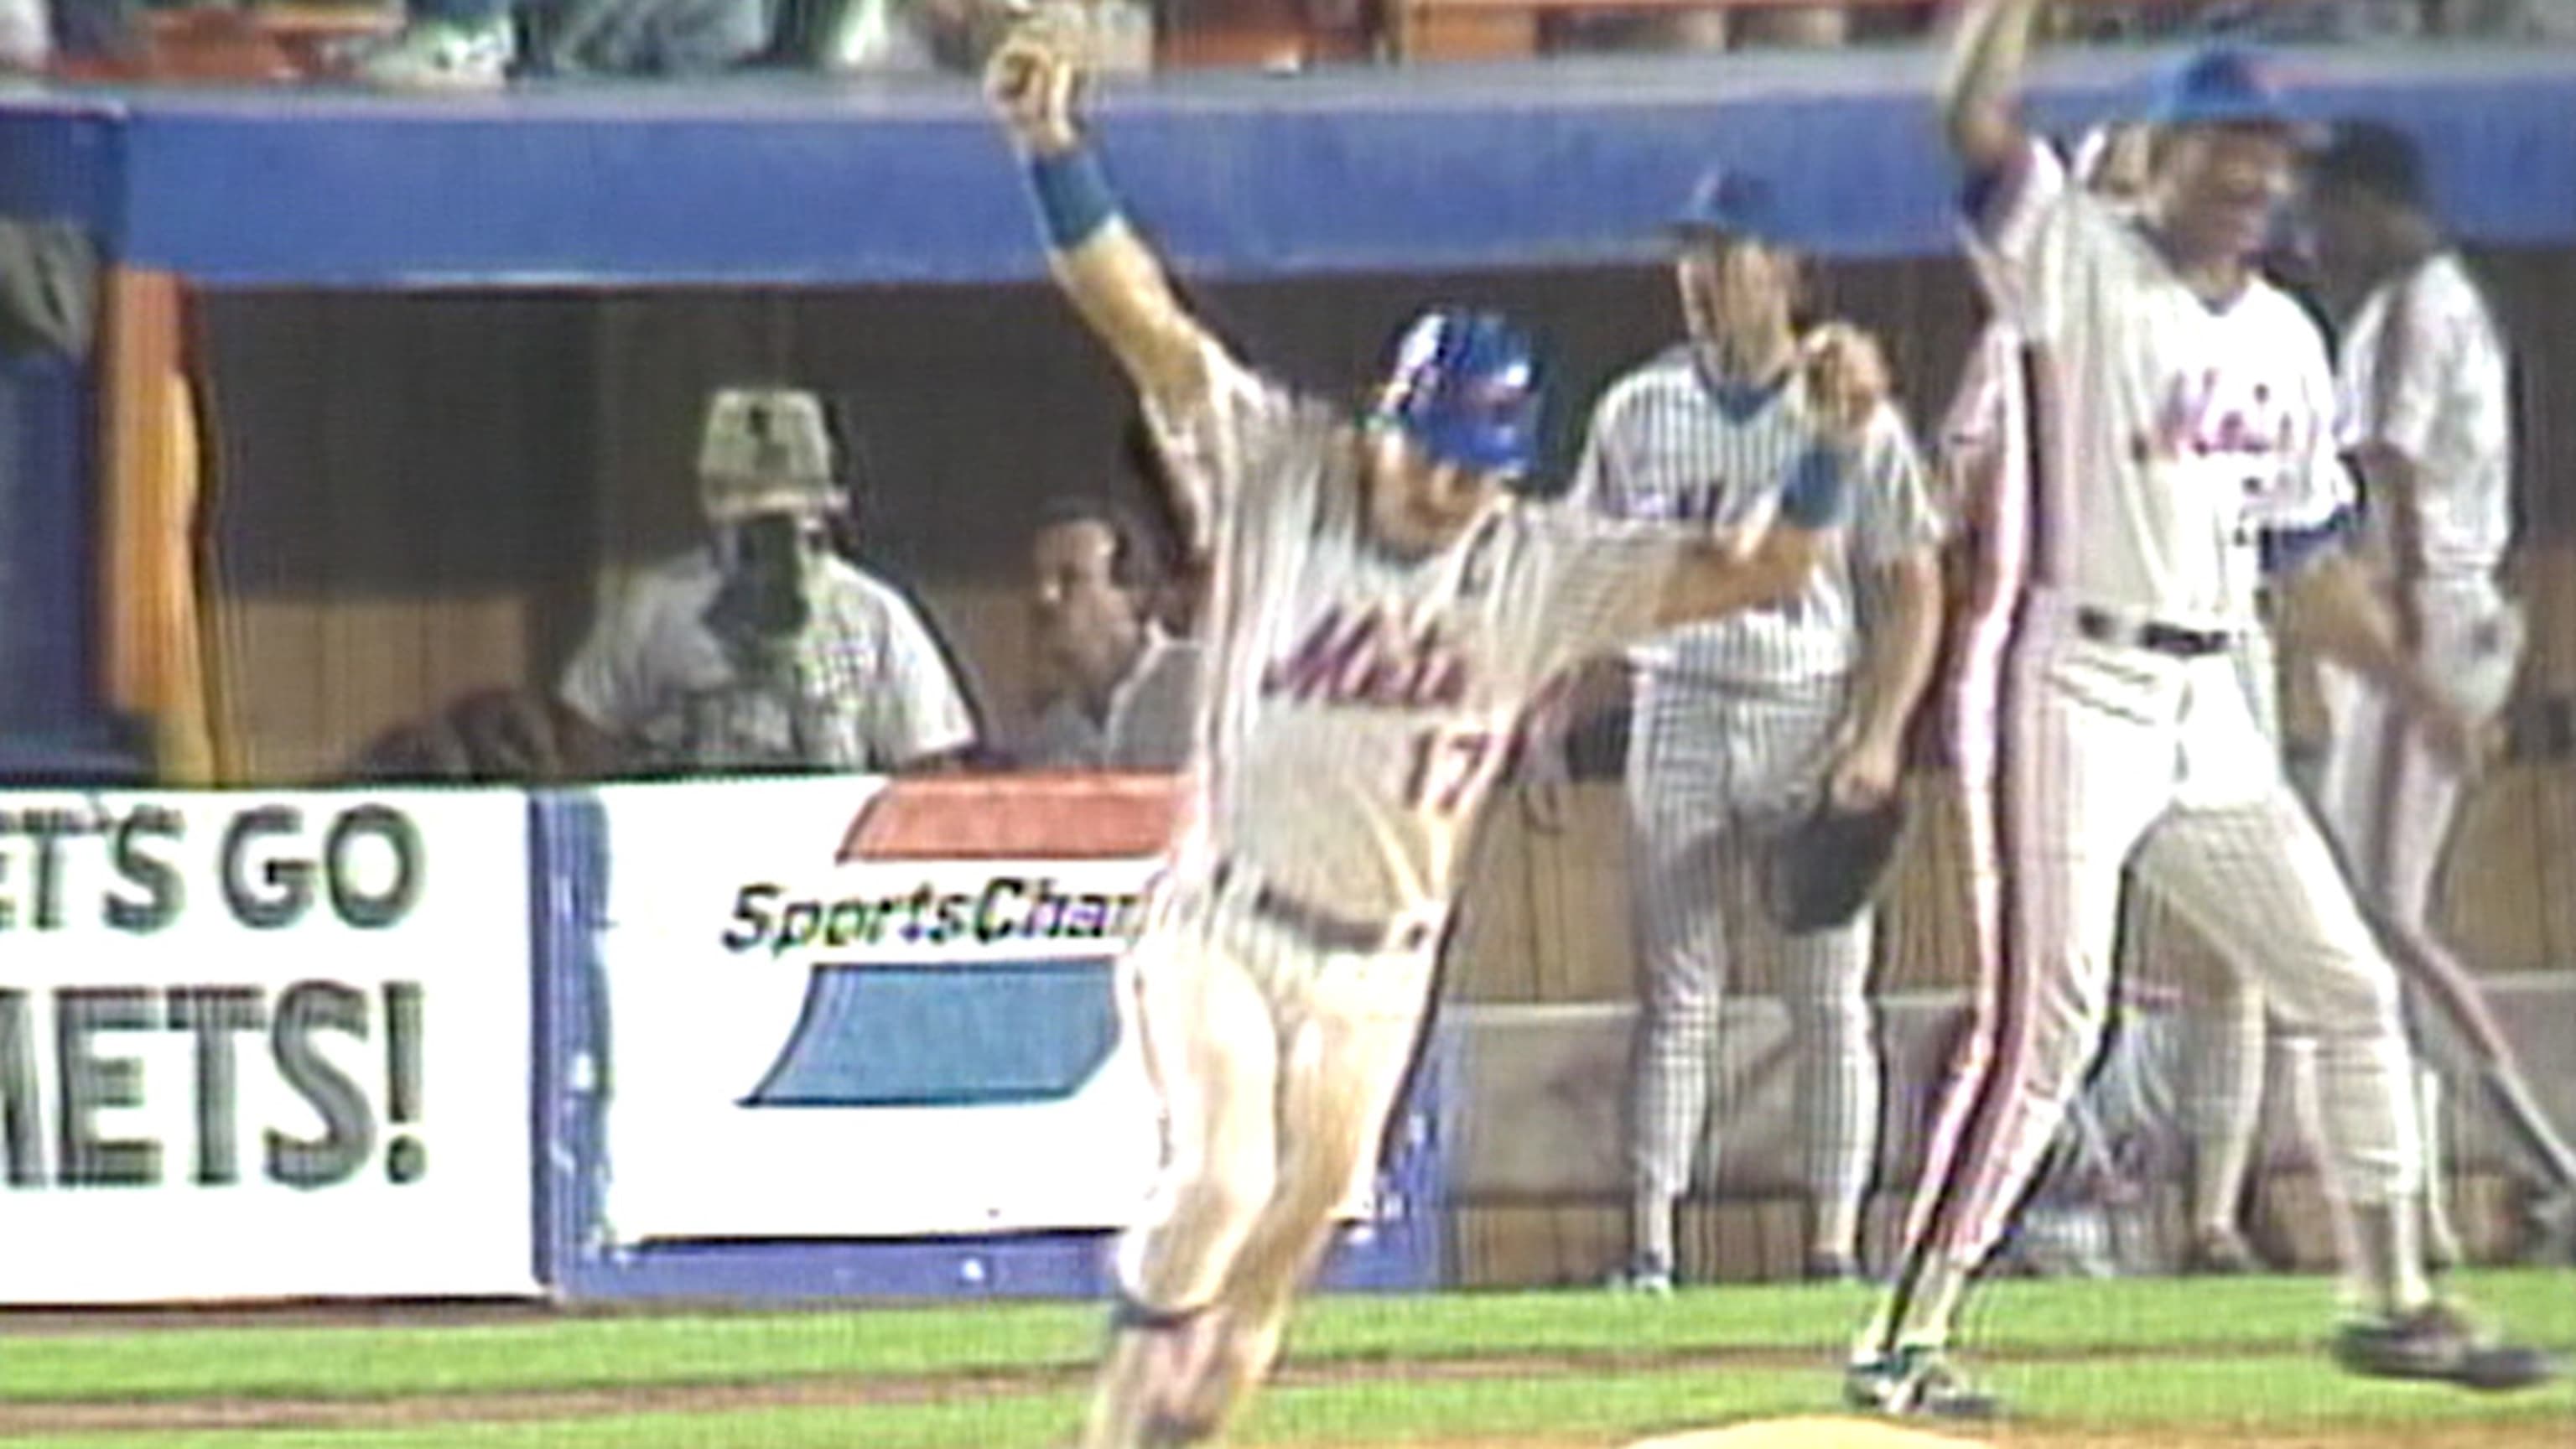 Keith Hernandez's top Mets moments: Oh captain, my captain